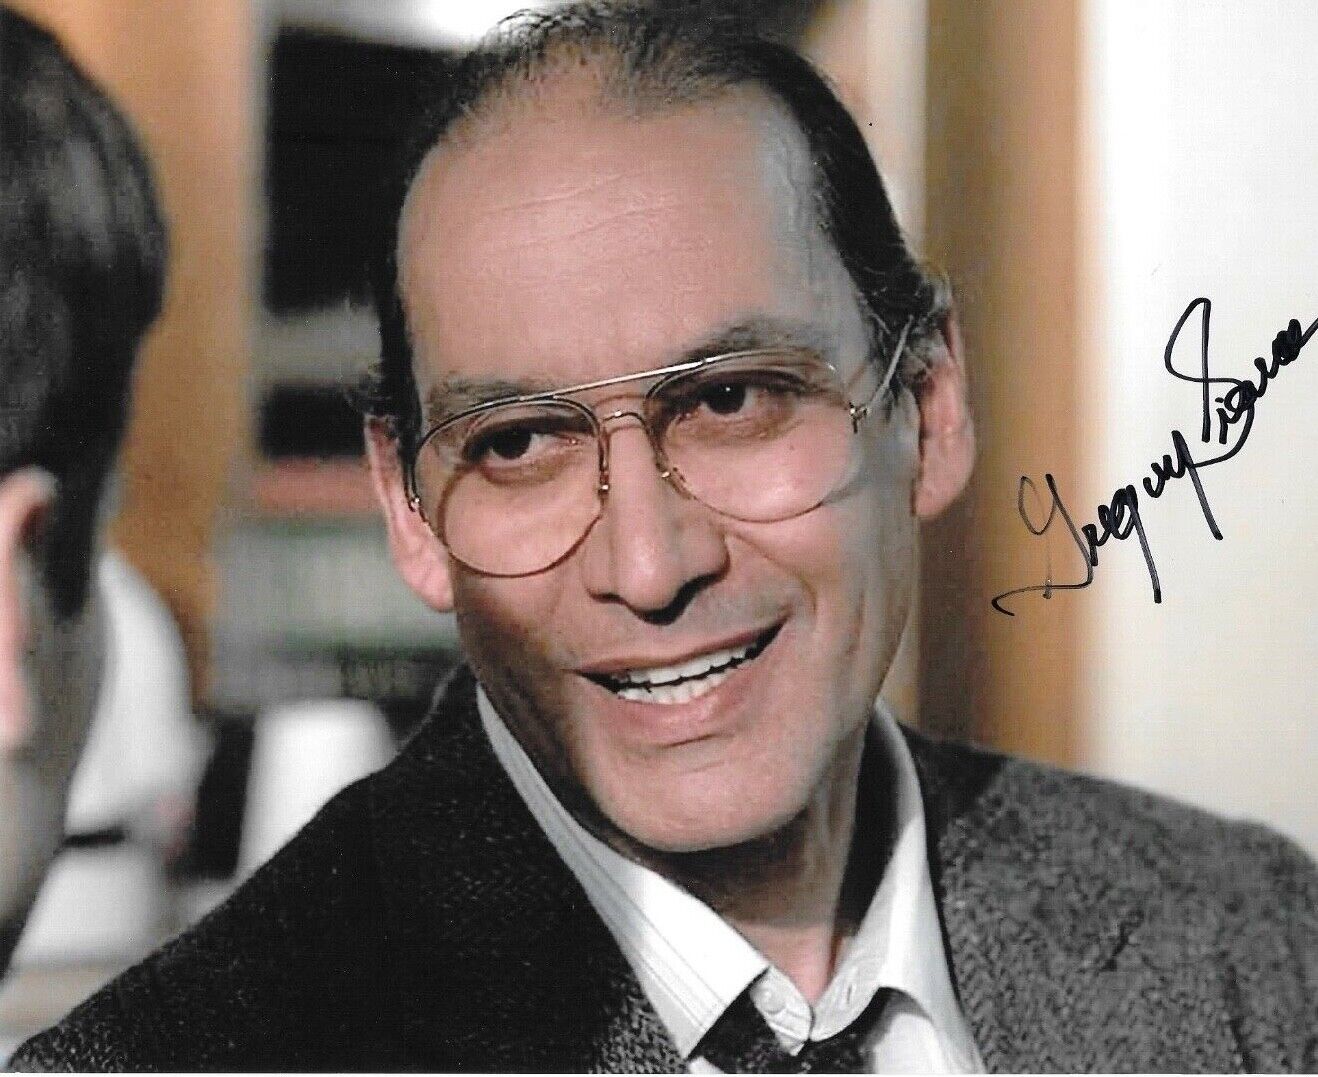 * GREGORY SIERRA * signed 8x10 Photo Poster painting * THE X-FILES * COA * 2